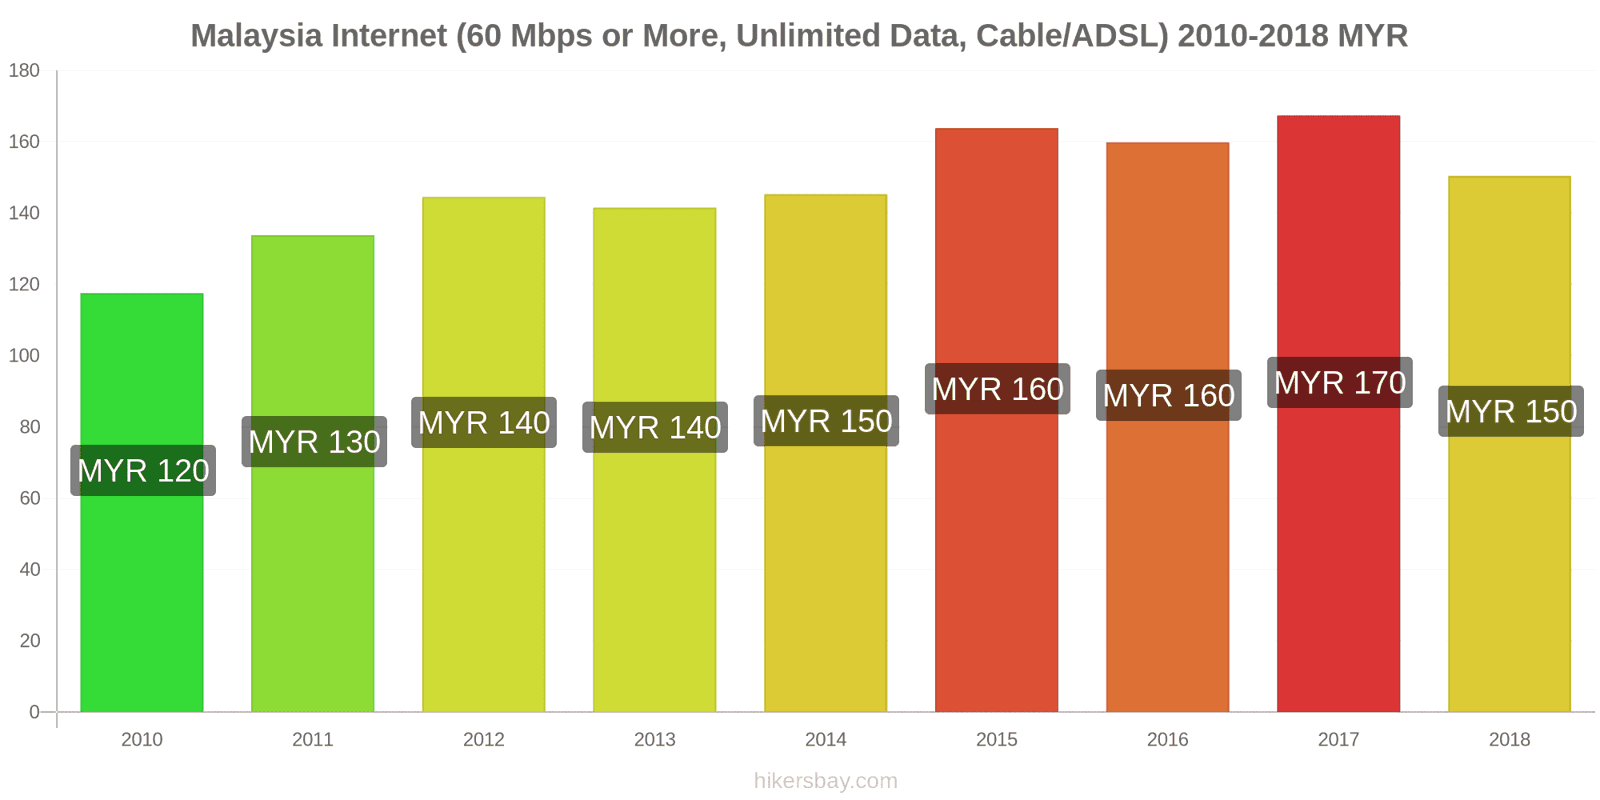 Malaysia price changes Internet (60 Mbps or more, unlimited data, cable/ADSL) hikersbay.com